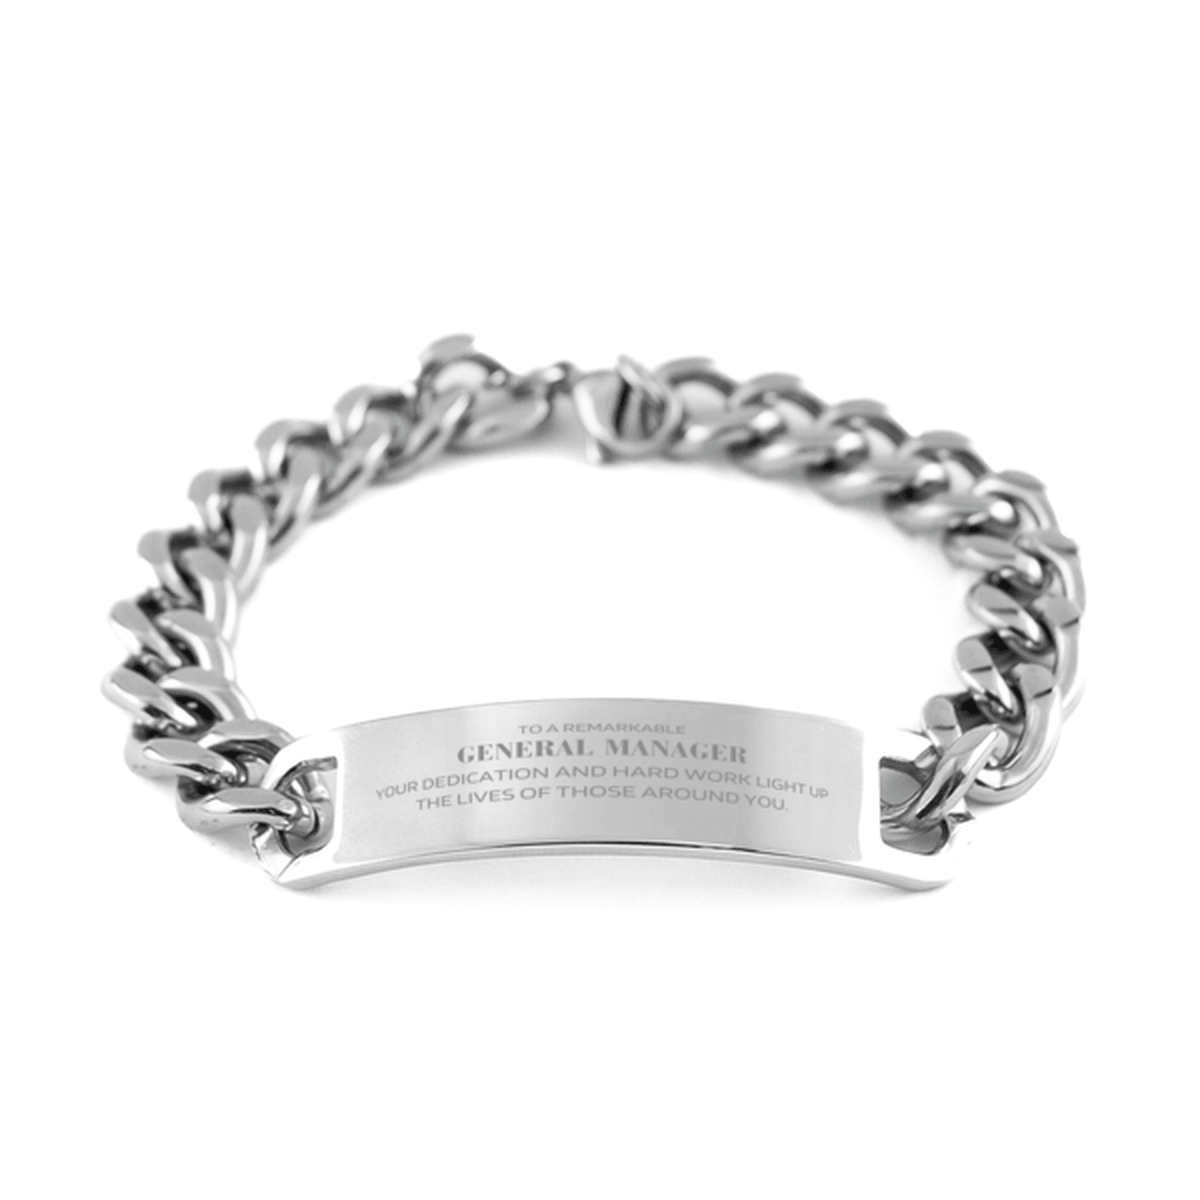 Remarkable General Manager Gifts, Your dedication and hard work, Inspirational Birthday Christmas Unique Cuban Chain Stainless Steel Bracelet For General Manager, Coworkers, Men, Women, Friends - Mallard Moon Gift Shop